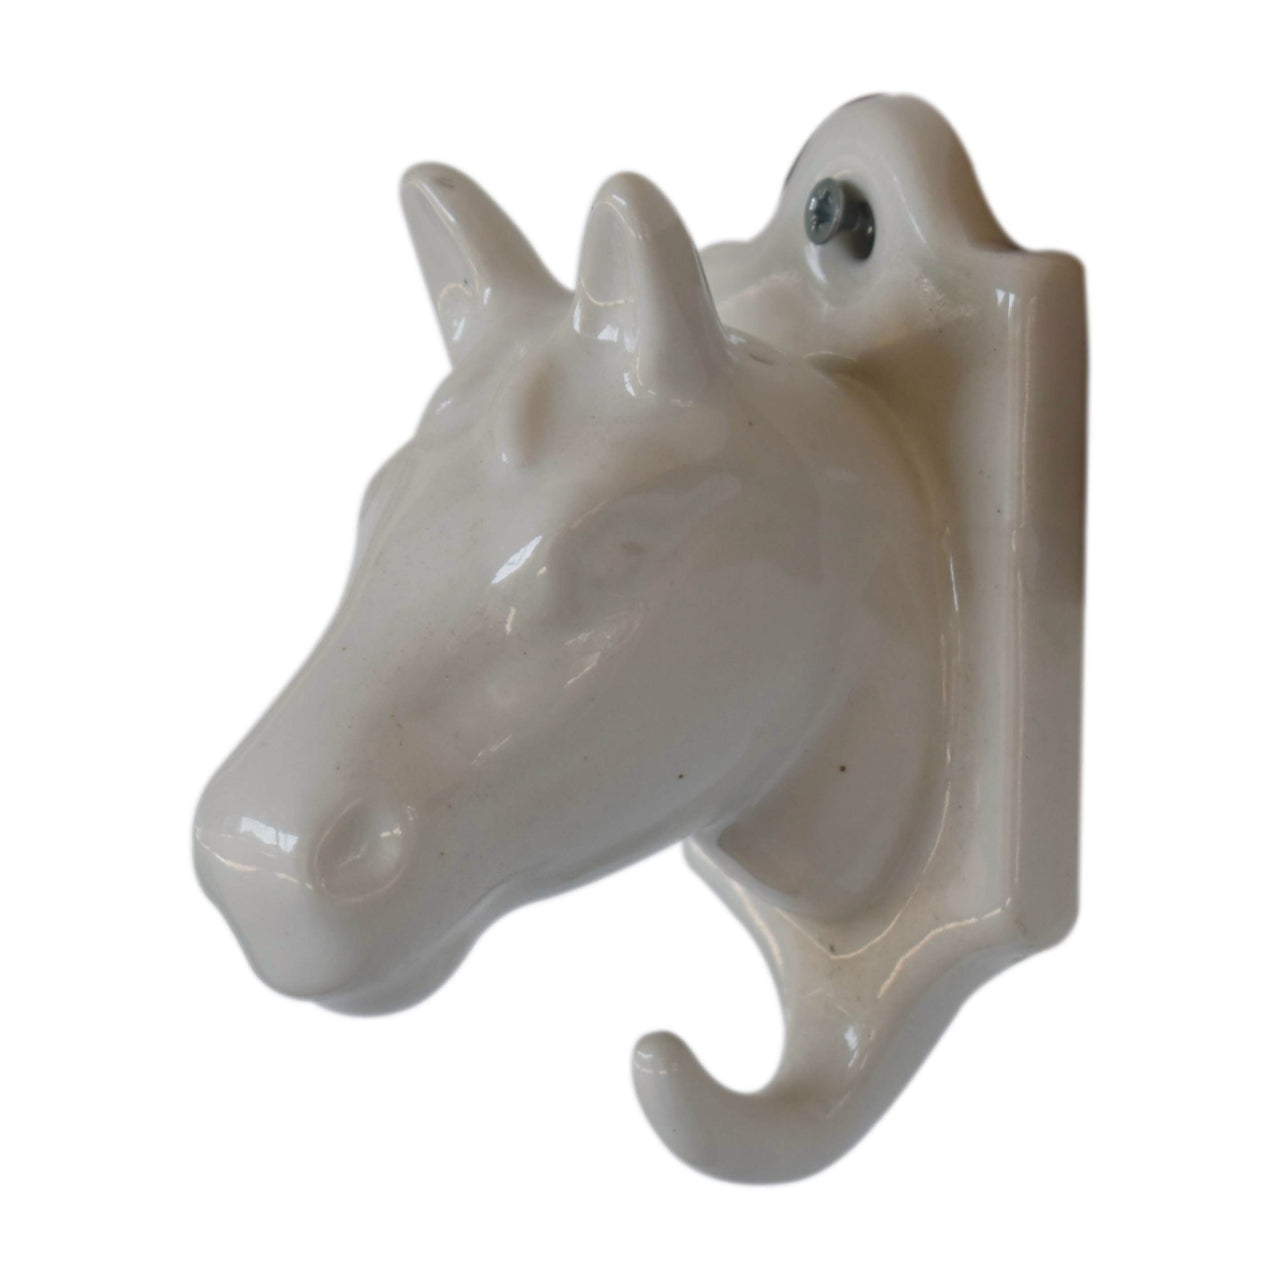 View Assorted Animal Wall Hooks Set of 3 information